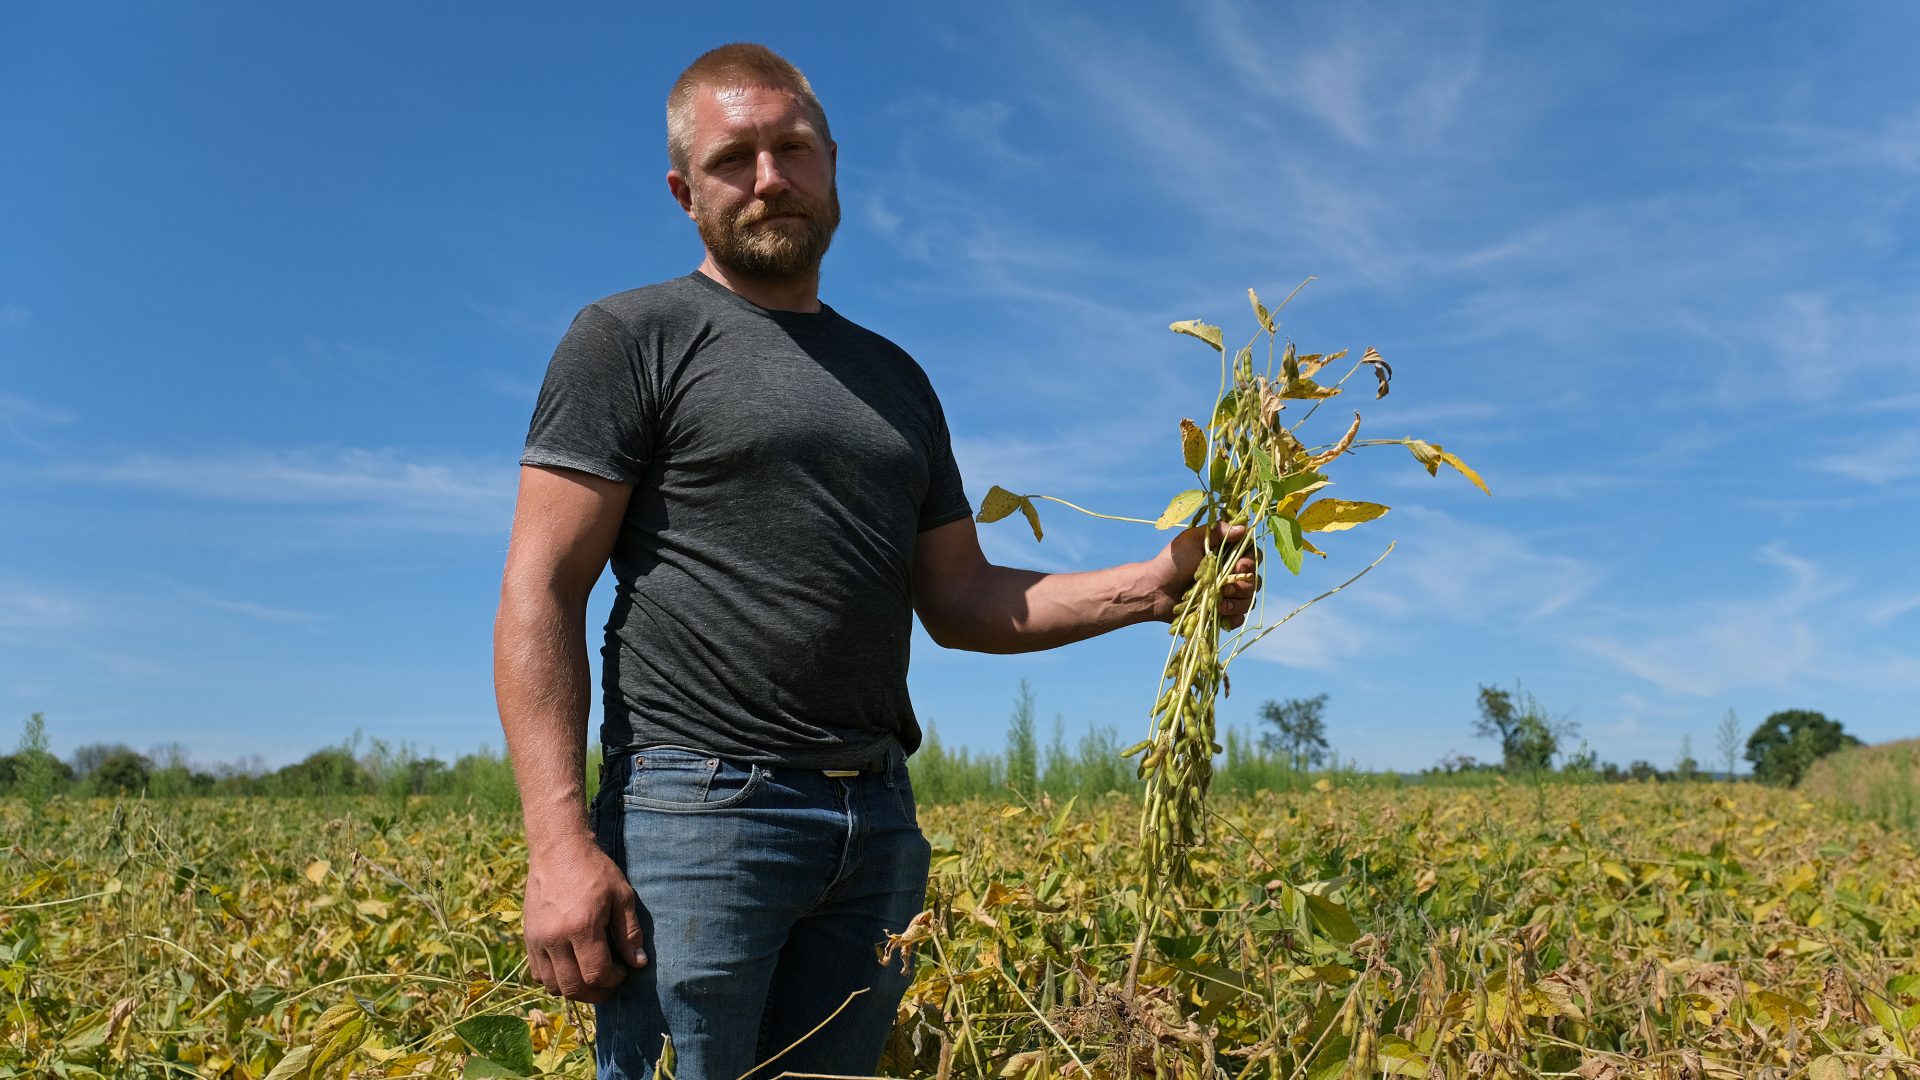 Grain farmer Jesse Poliskiewicz holds stems of soybeans while on his farm Sept. 20, 2019, in Upper Mount Bethel Township, Pennsylvania.